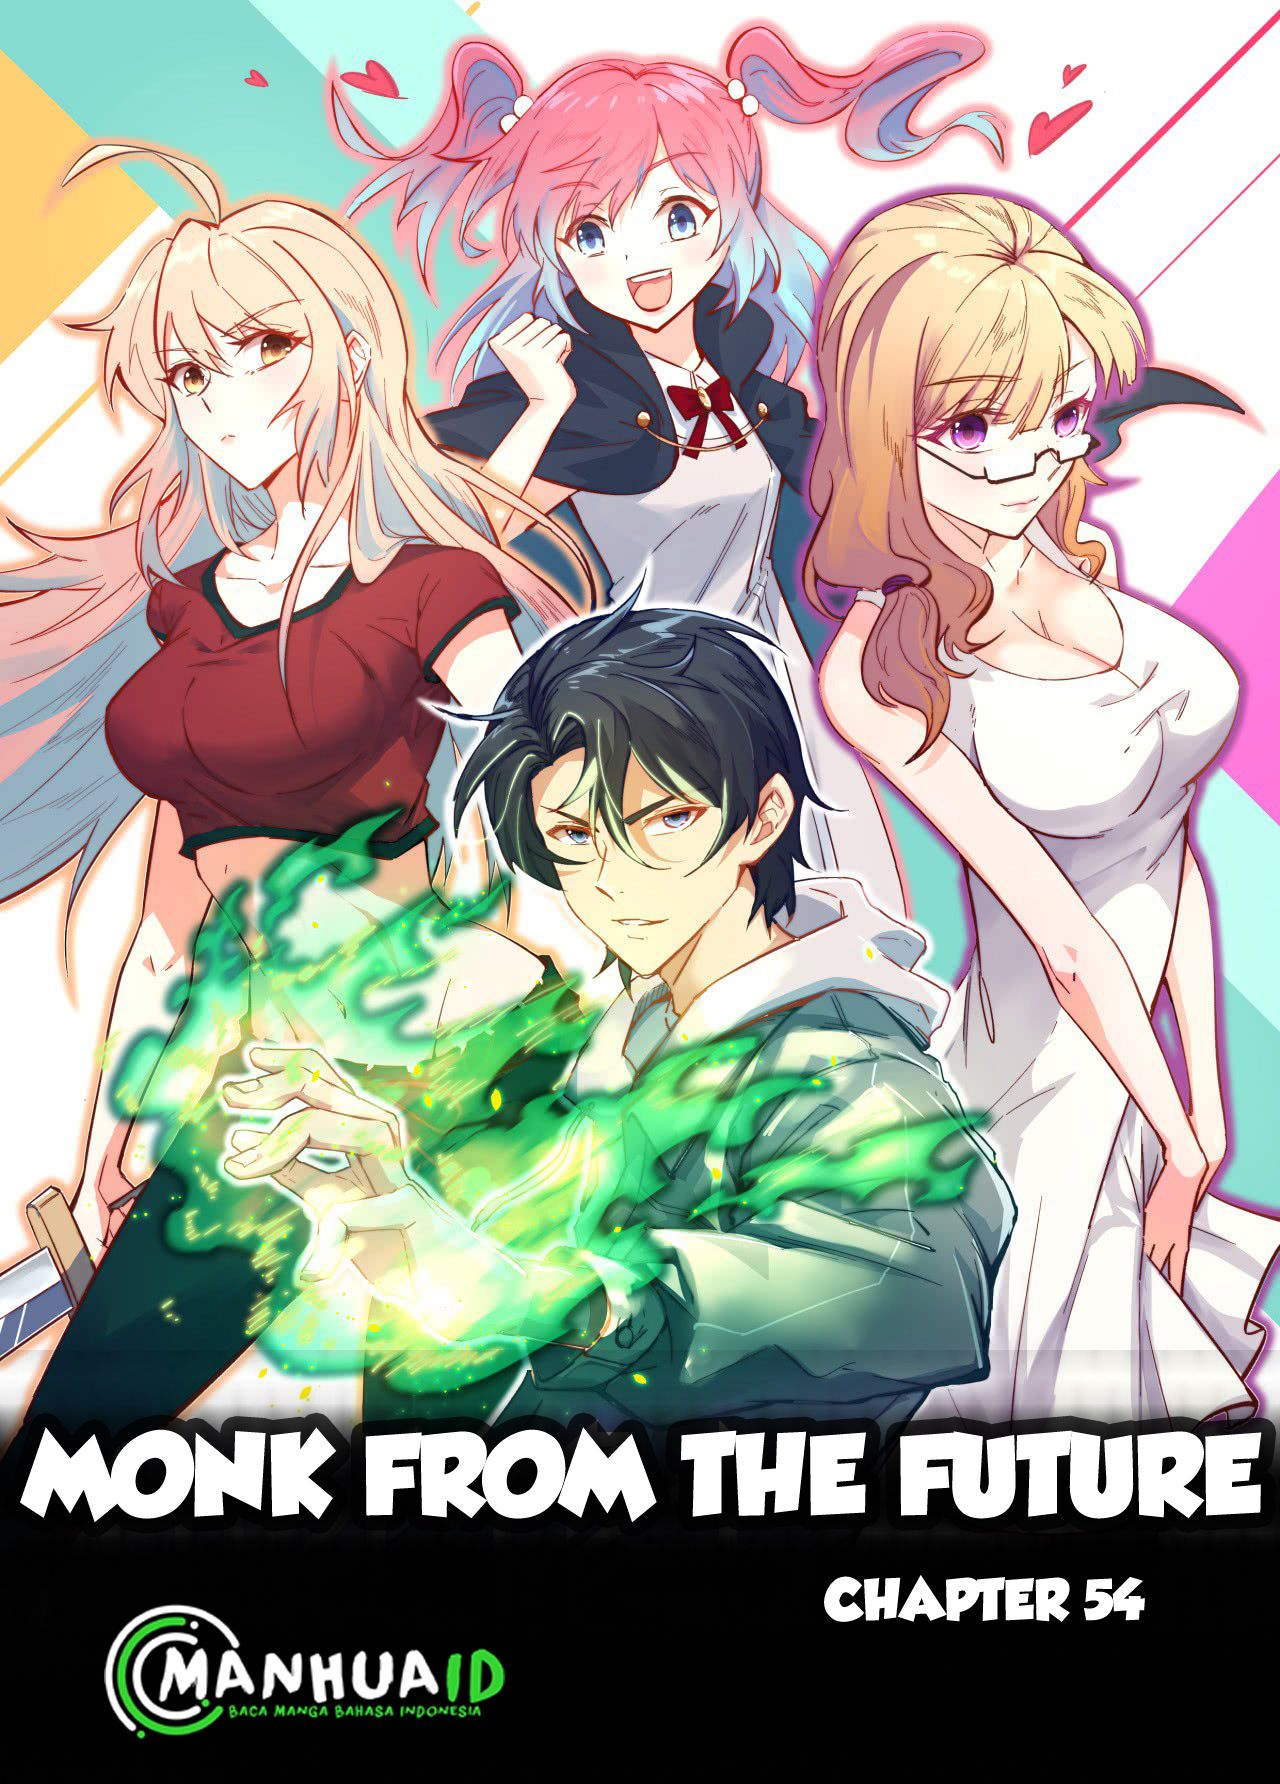 Monk From the Future Chapter 54